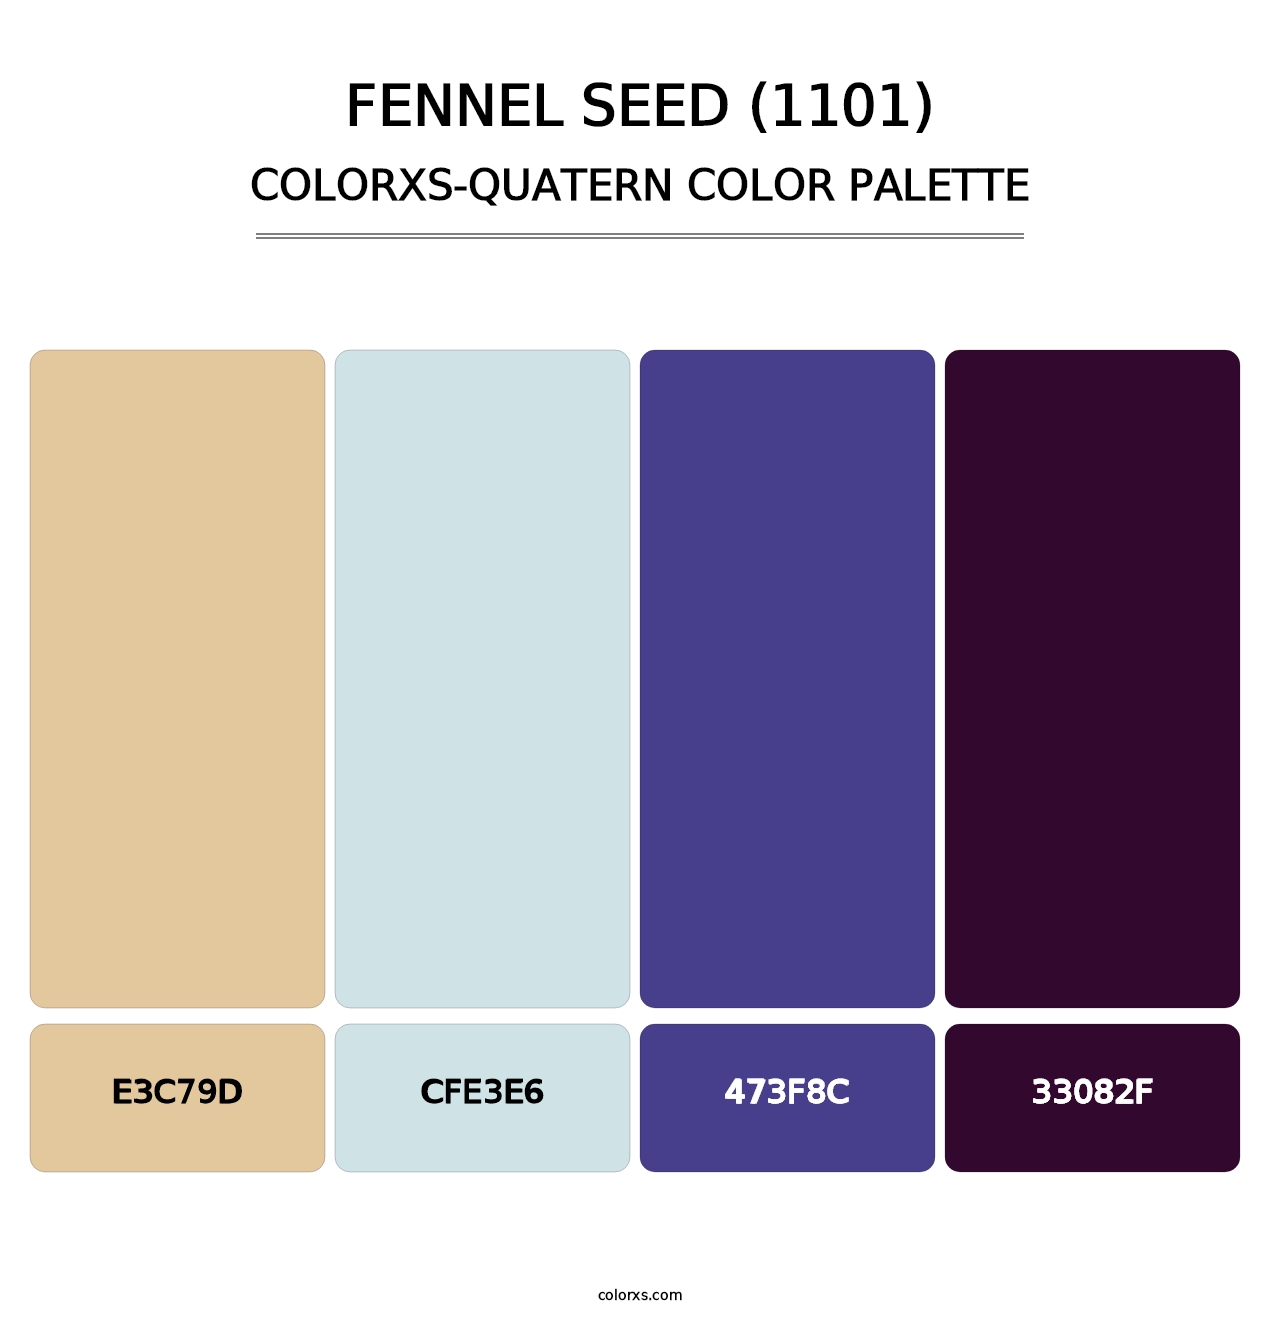 Fennel Seed (1101) - Colorxs Quatern Palette